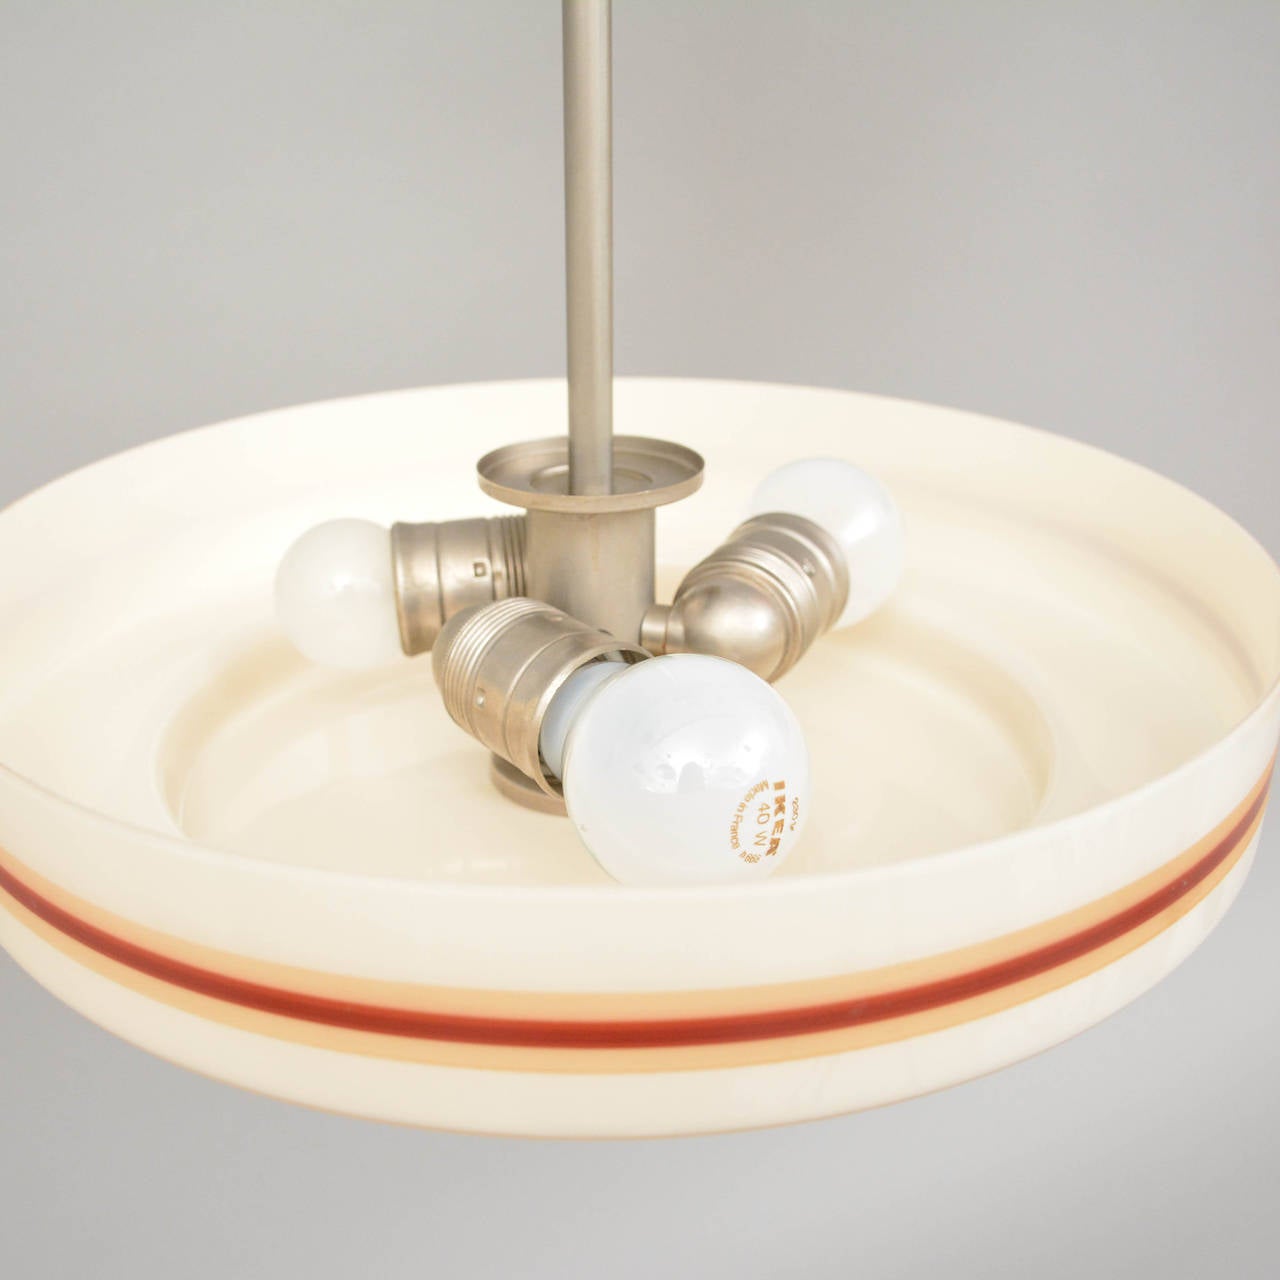 Painted Ceiling Lamp by Bohlmark, Stockholm 1930s